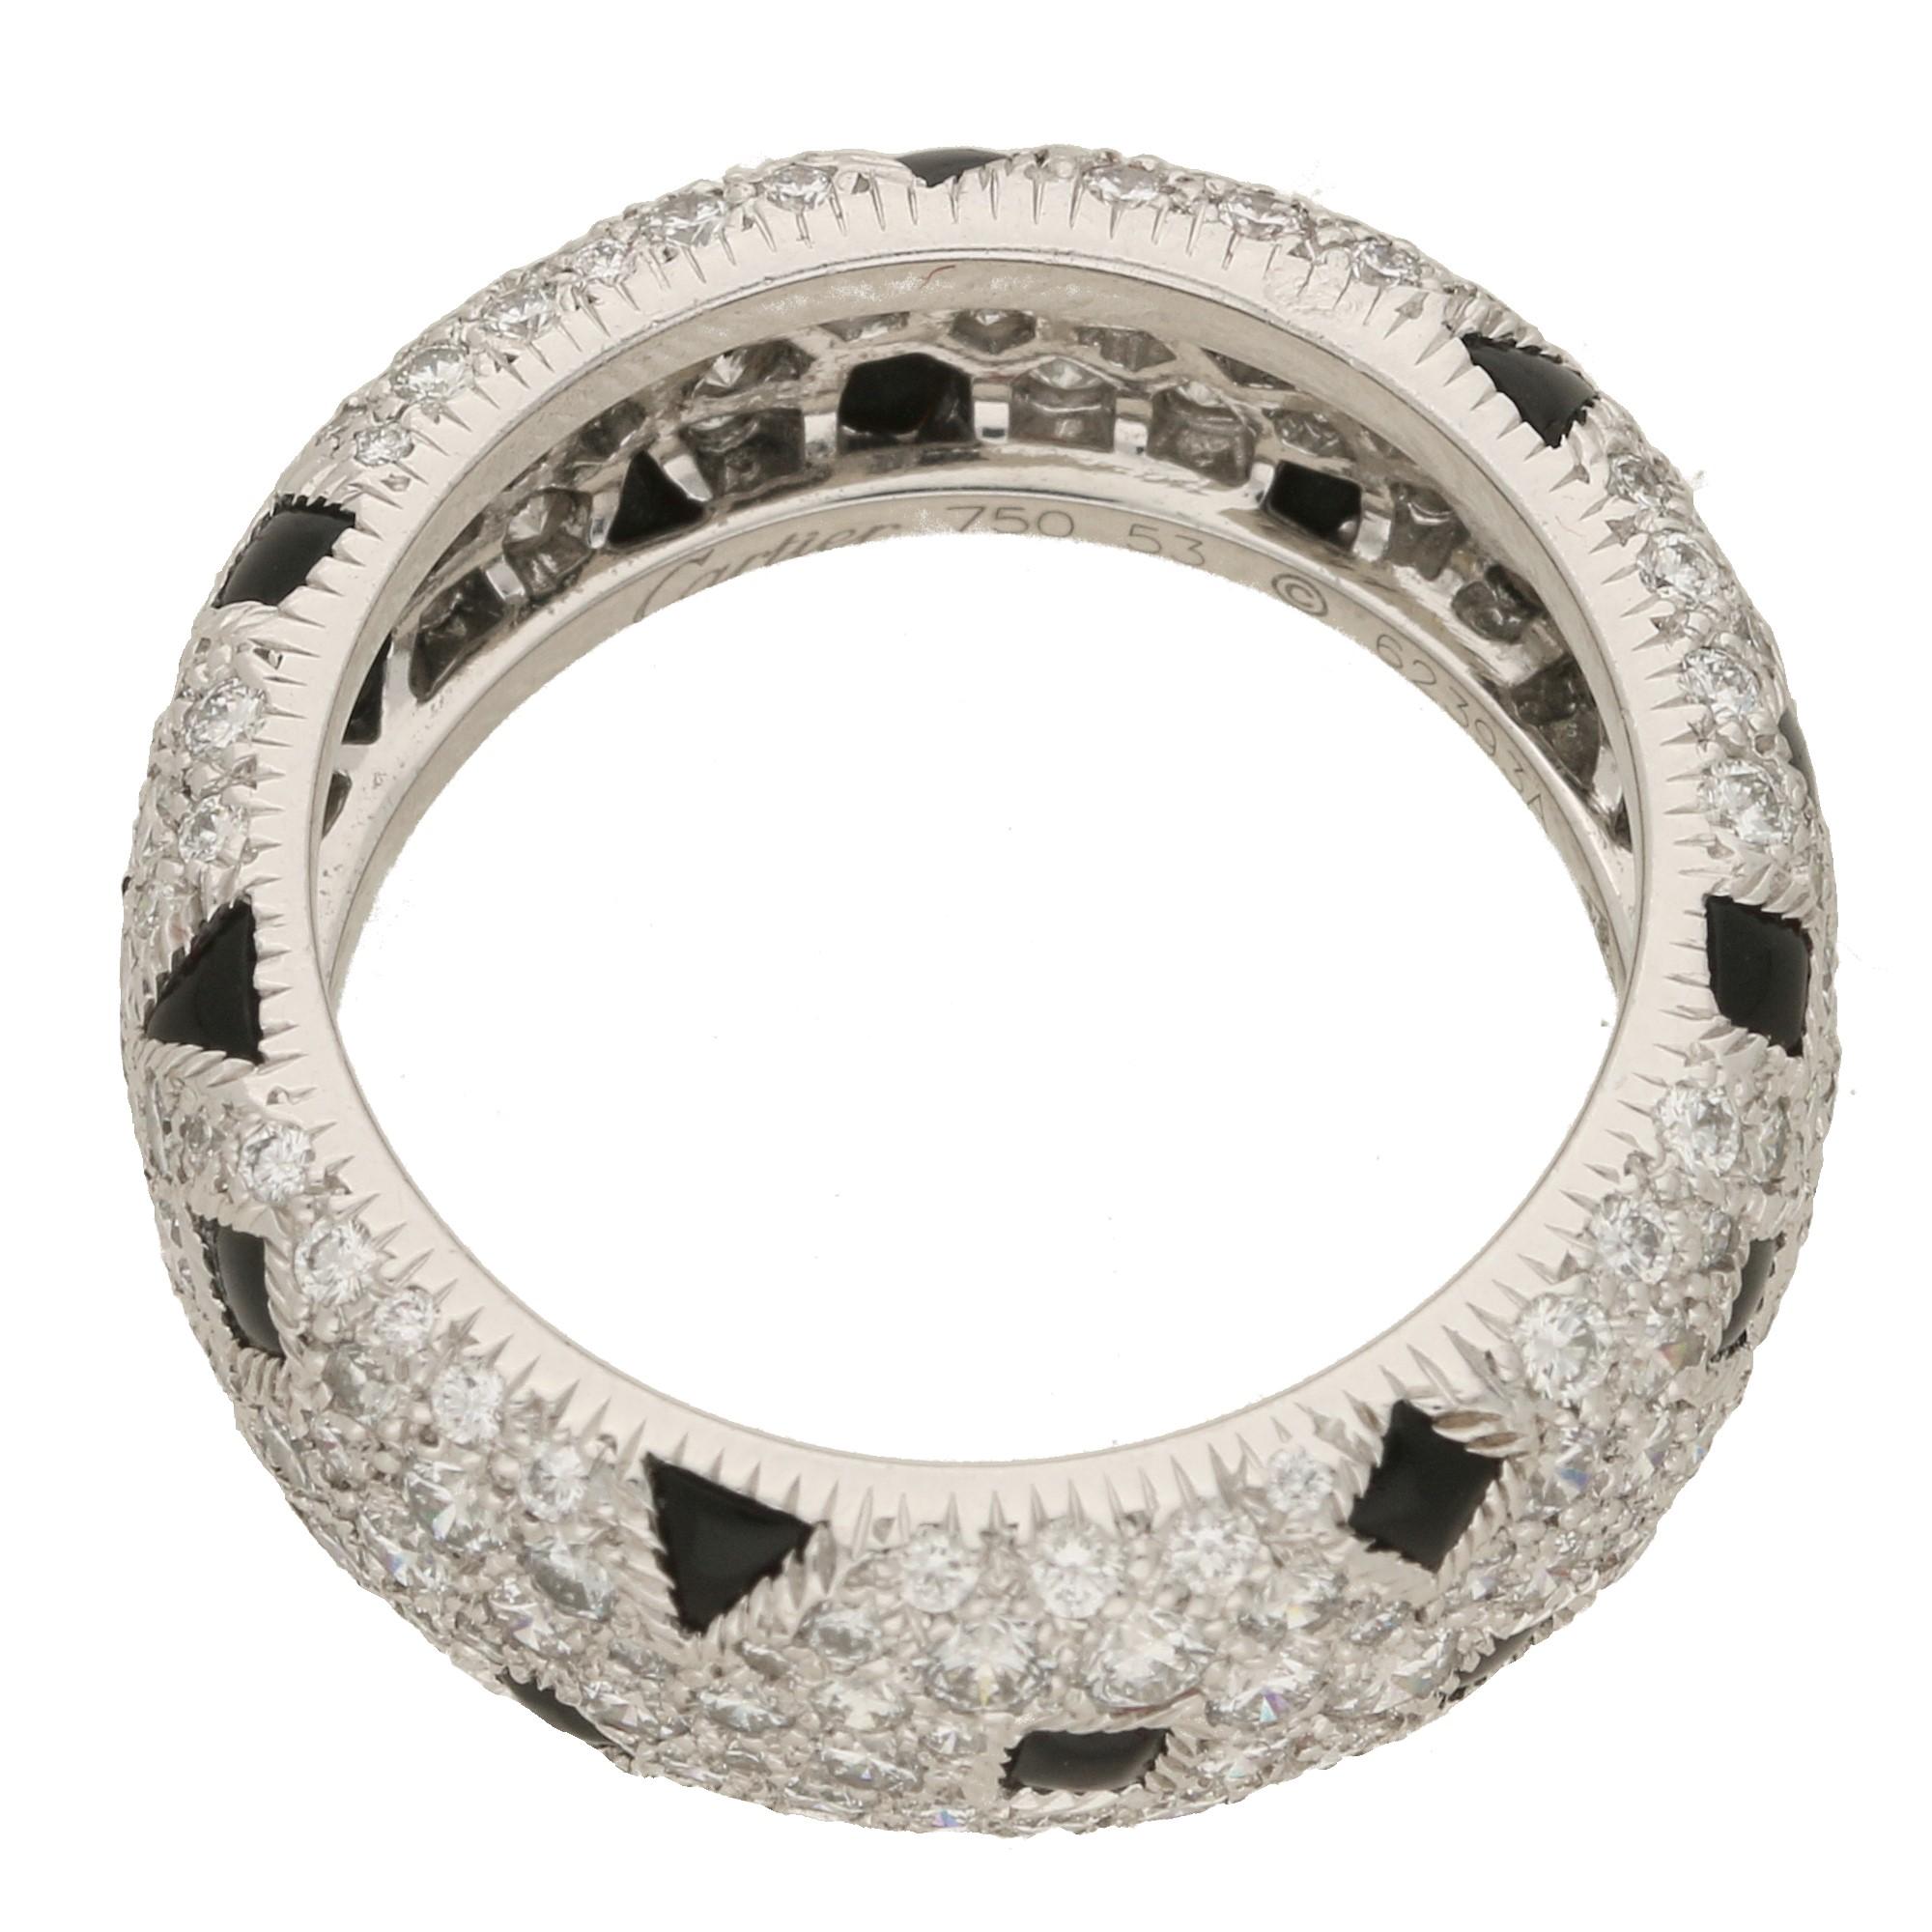 Round Cut Cartier Pelage Diamond and Onyx Eternity Ring Set in 18k White Gold